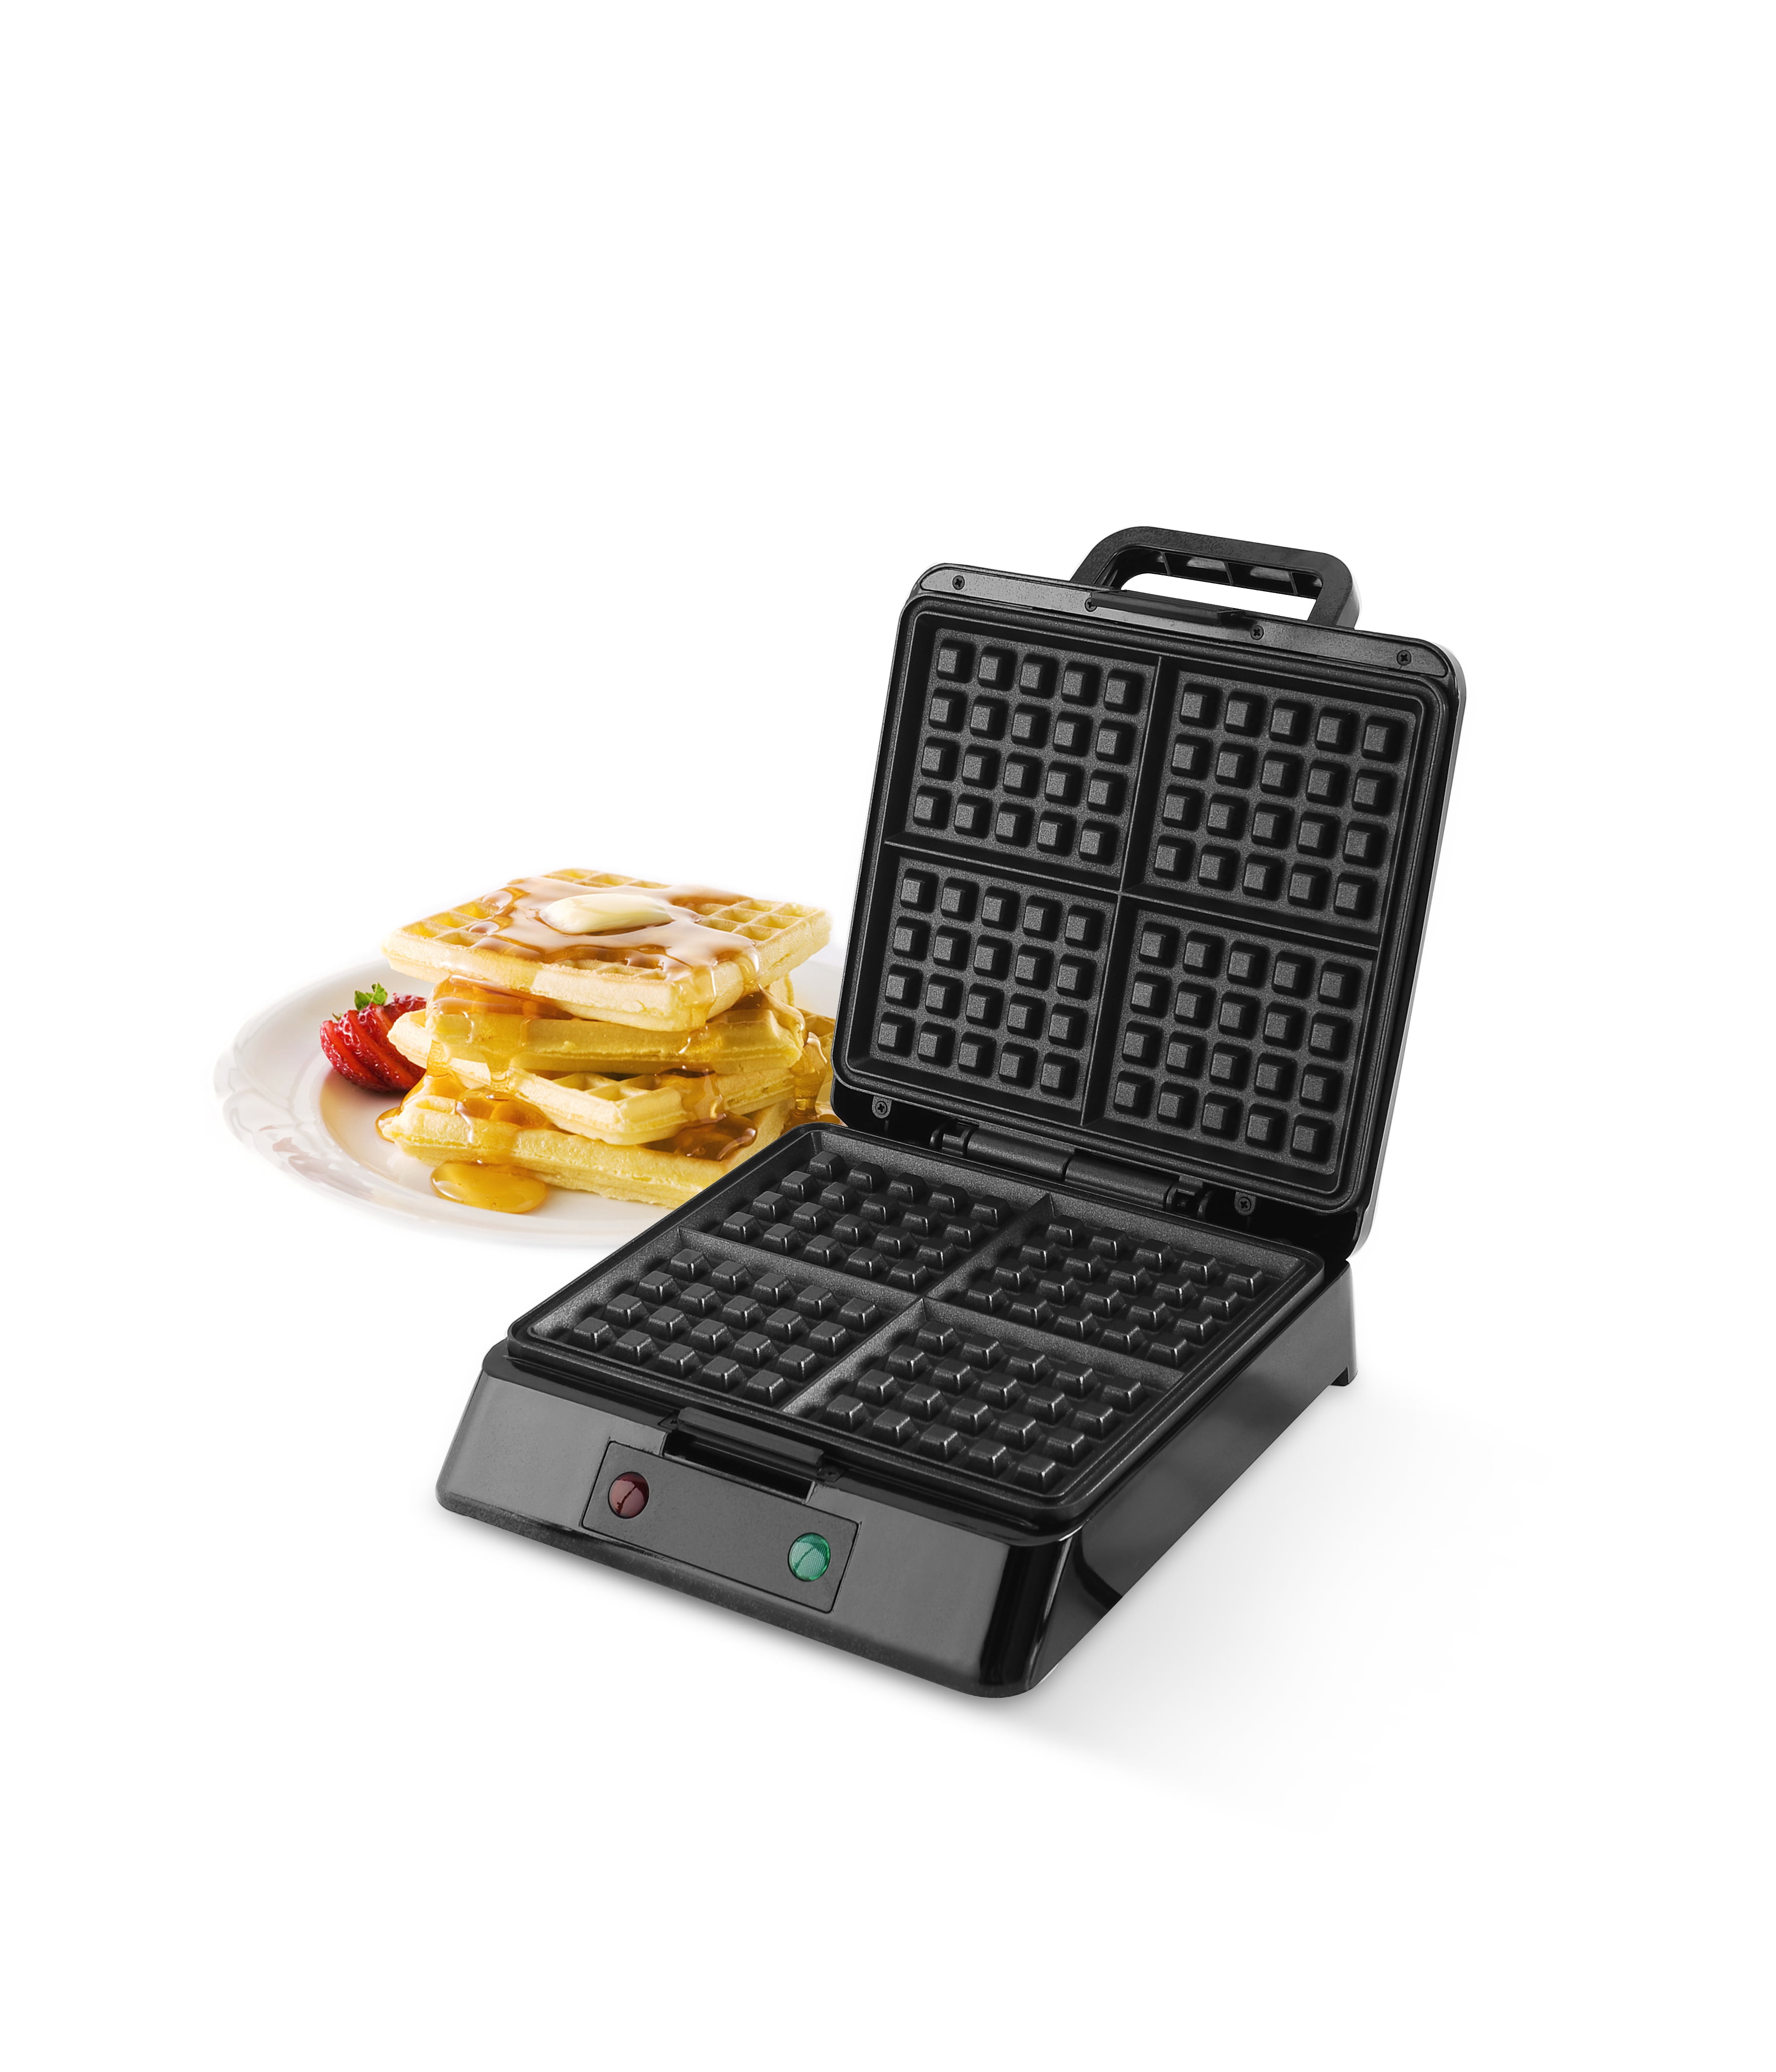 Golden Prairie Extra Deep Belgian Waffle Maker 1200W, 2-Slice Nonstick Waffle Iron Stainless Steel, 1 inch Thick Fluffier Waffle, 6 Adjustable